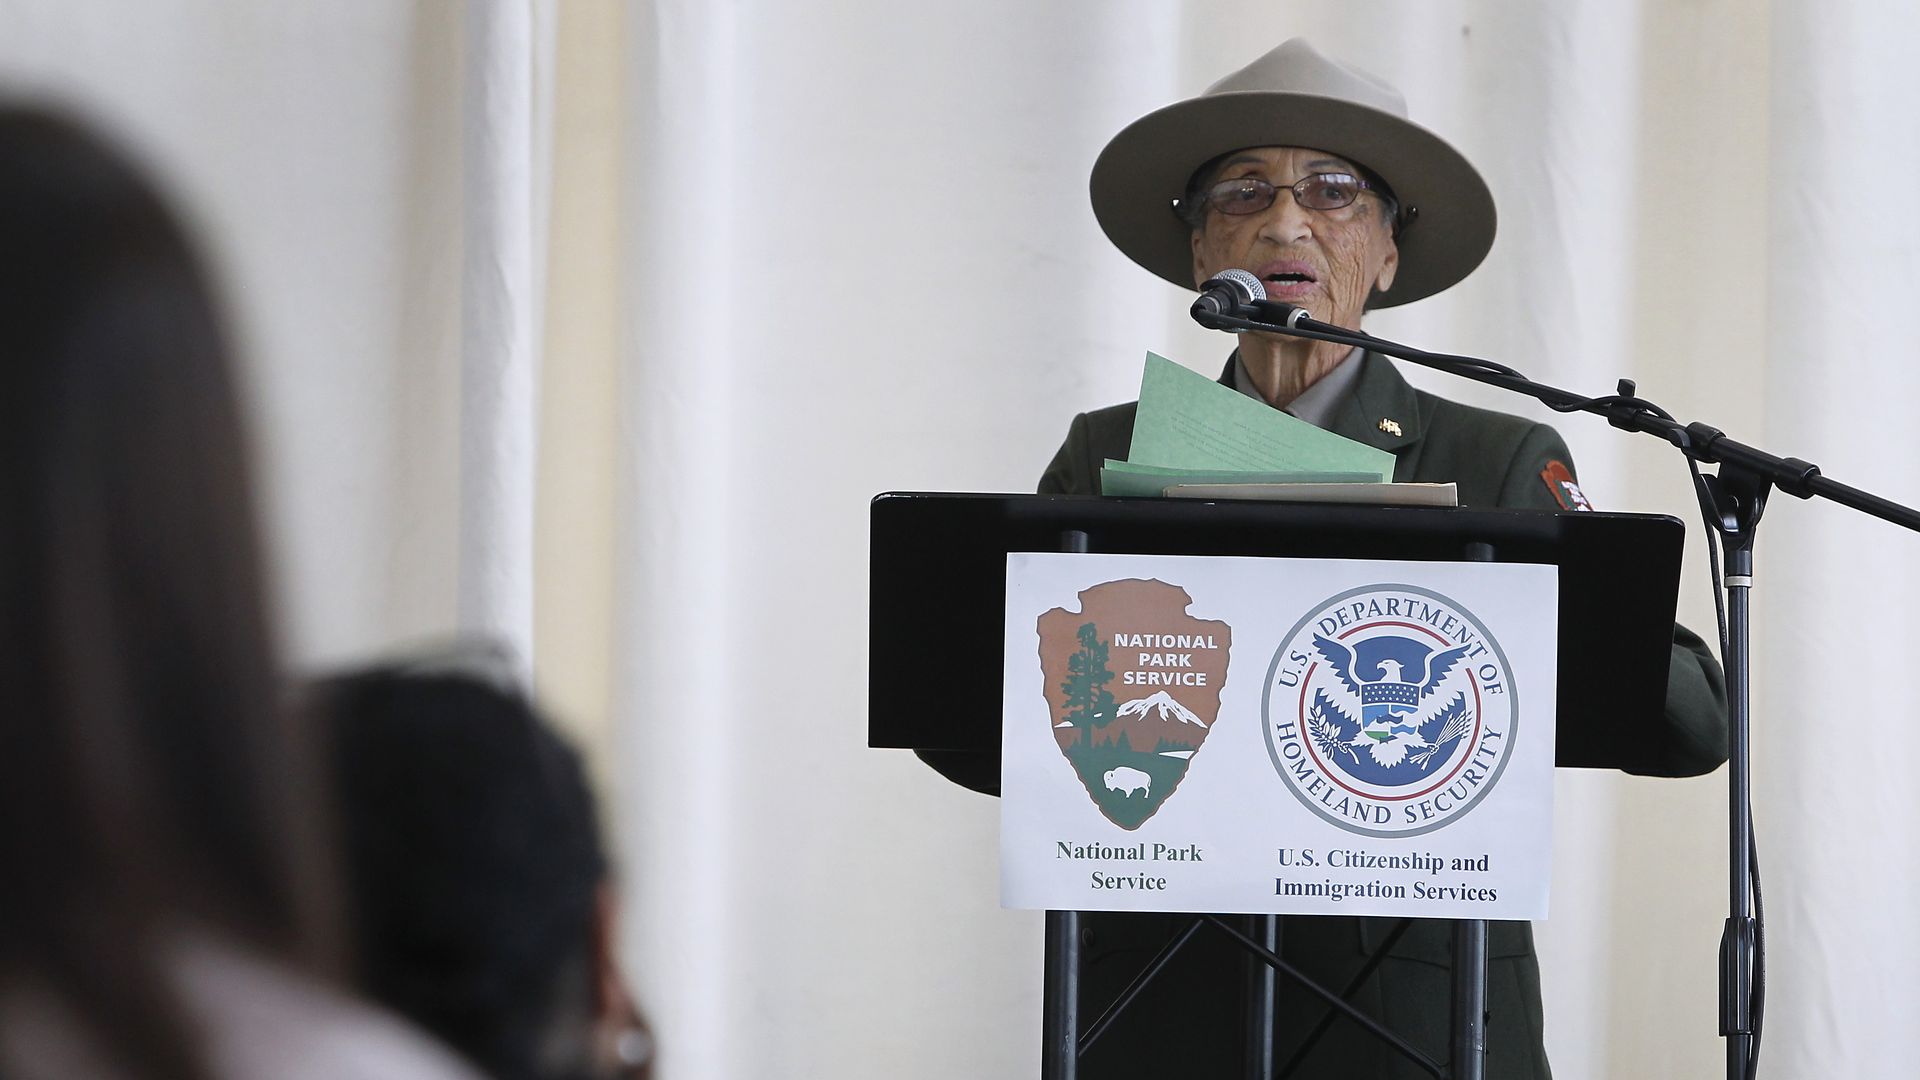 A woman in a ranger hat speaks at a microphone.